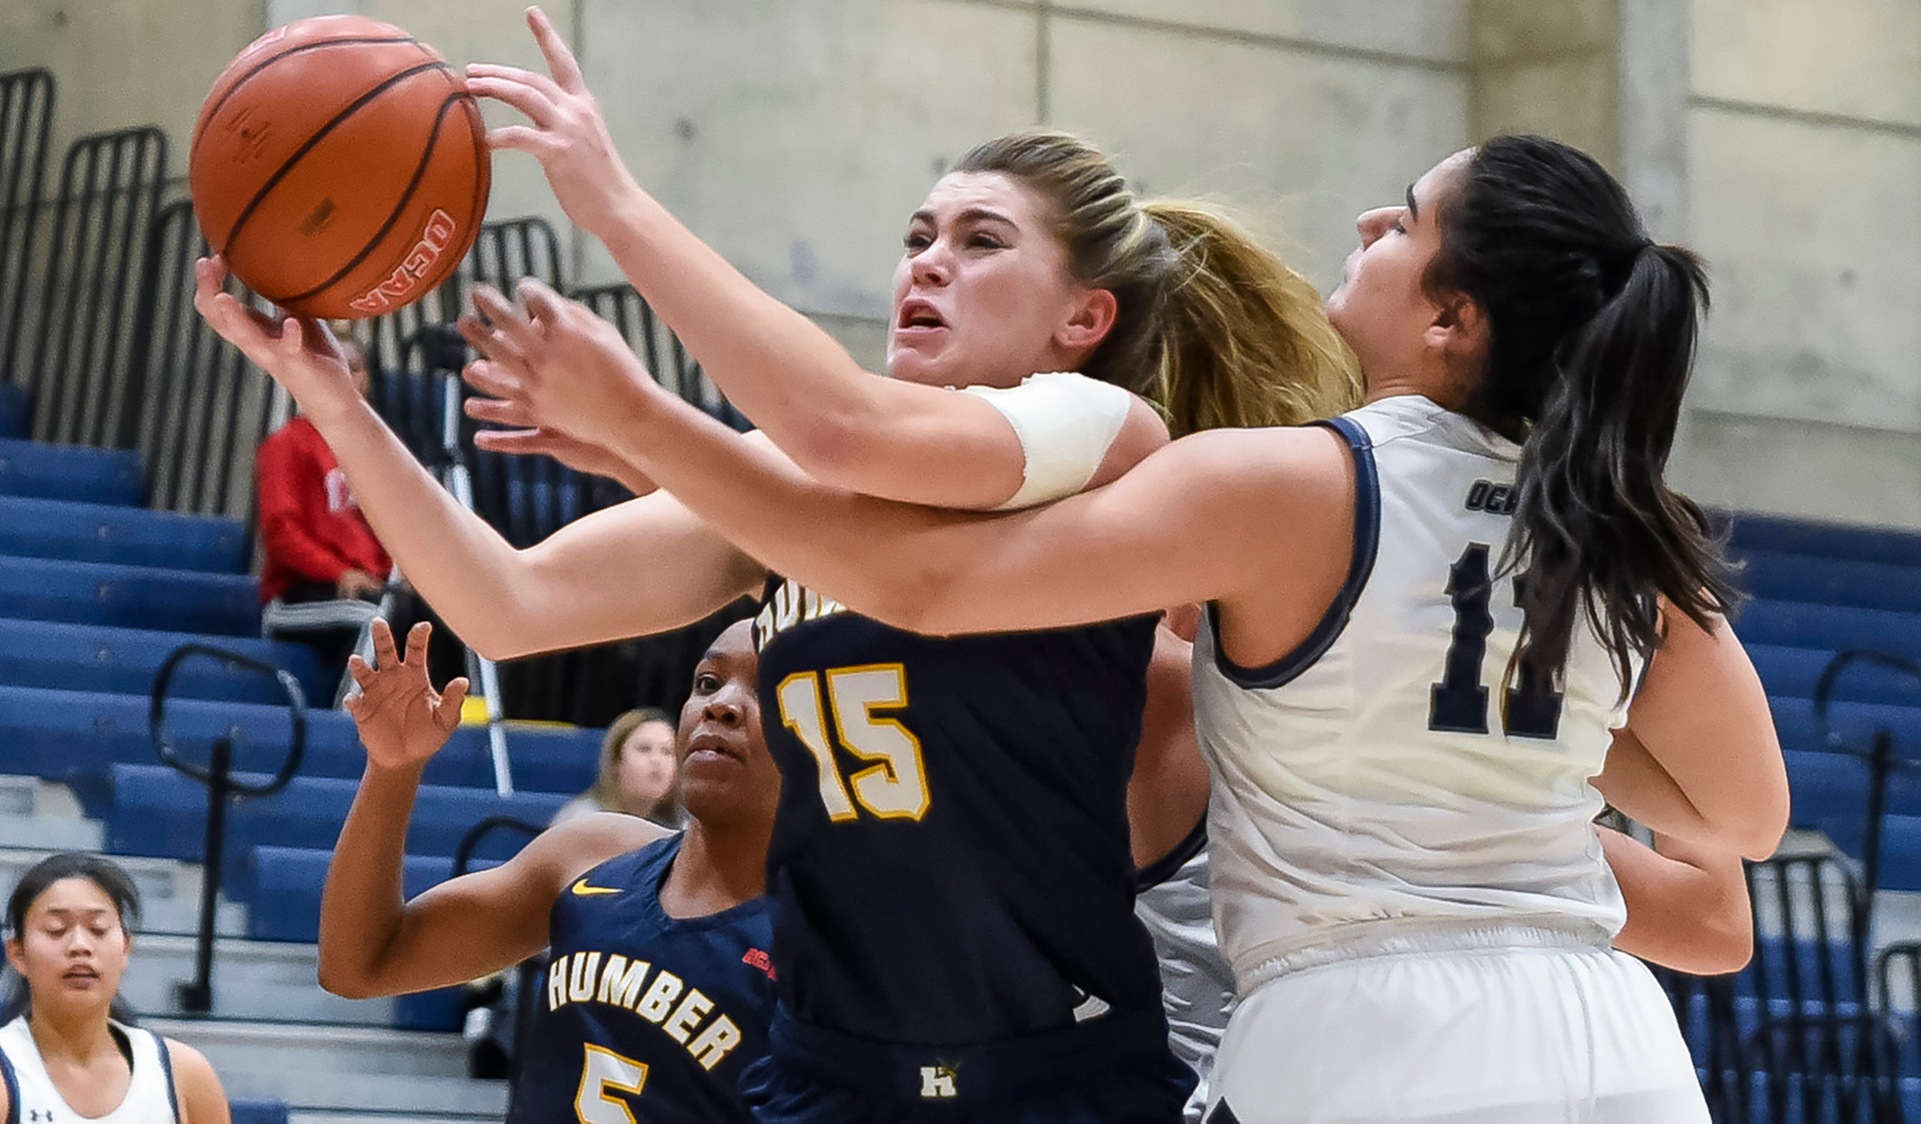 No. 11 WOMEN'S BASKETBALL WIN SIXTH STRAIGHT WITH ROAD WIN OVER UTM, 69-56